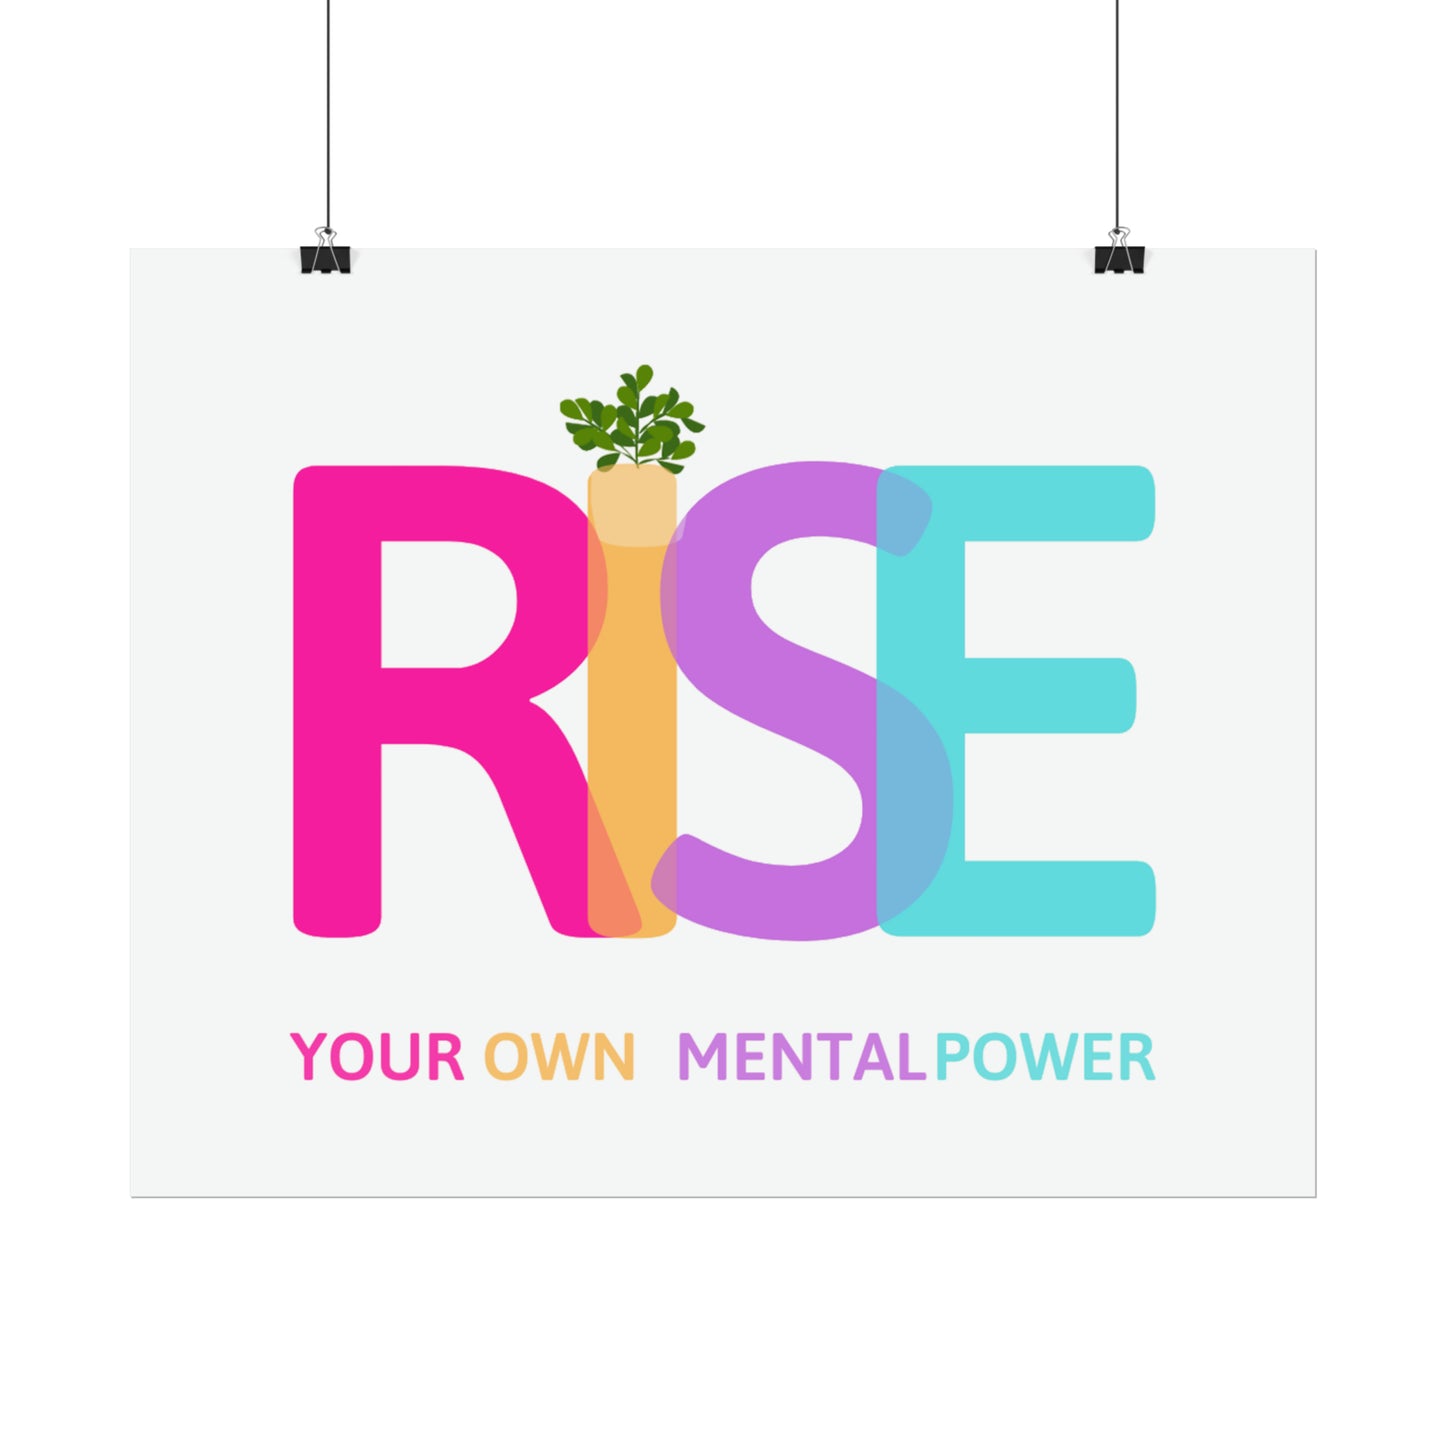 PoM's Self Motivation series ... RISE ... Your own mental Power (affirmation). - Rolled Poster (180, 200 or 285 gsm paper options)